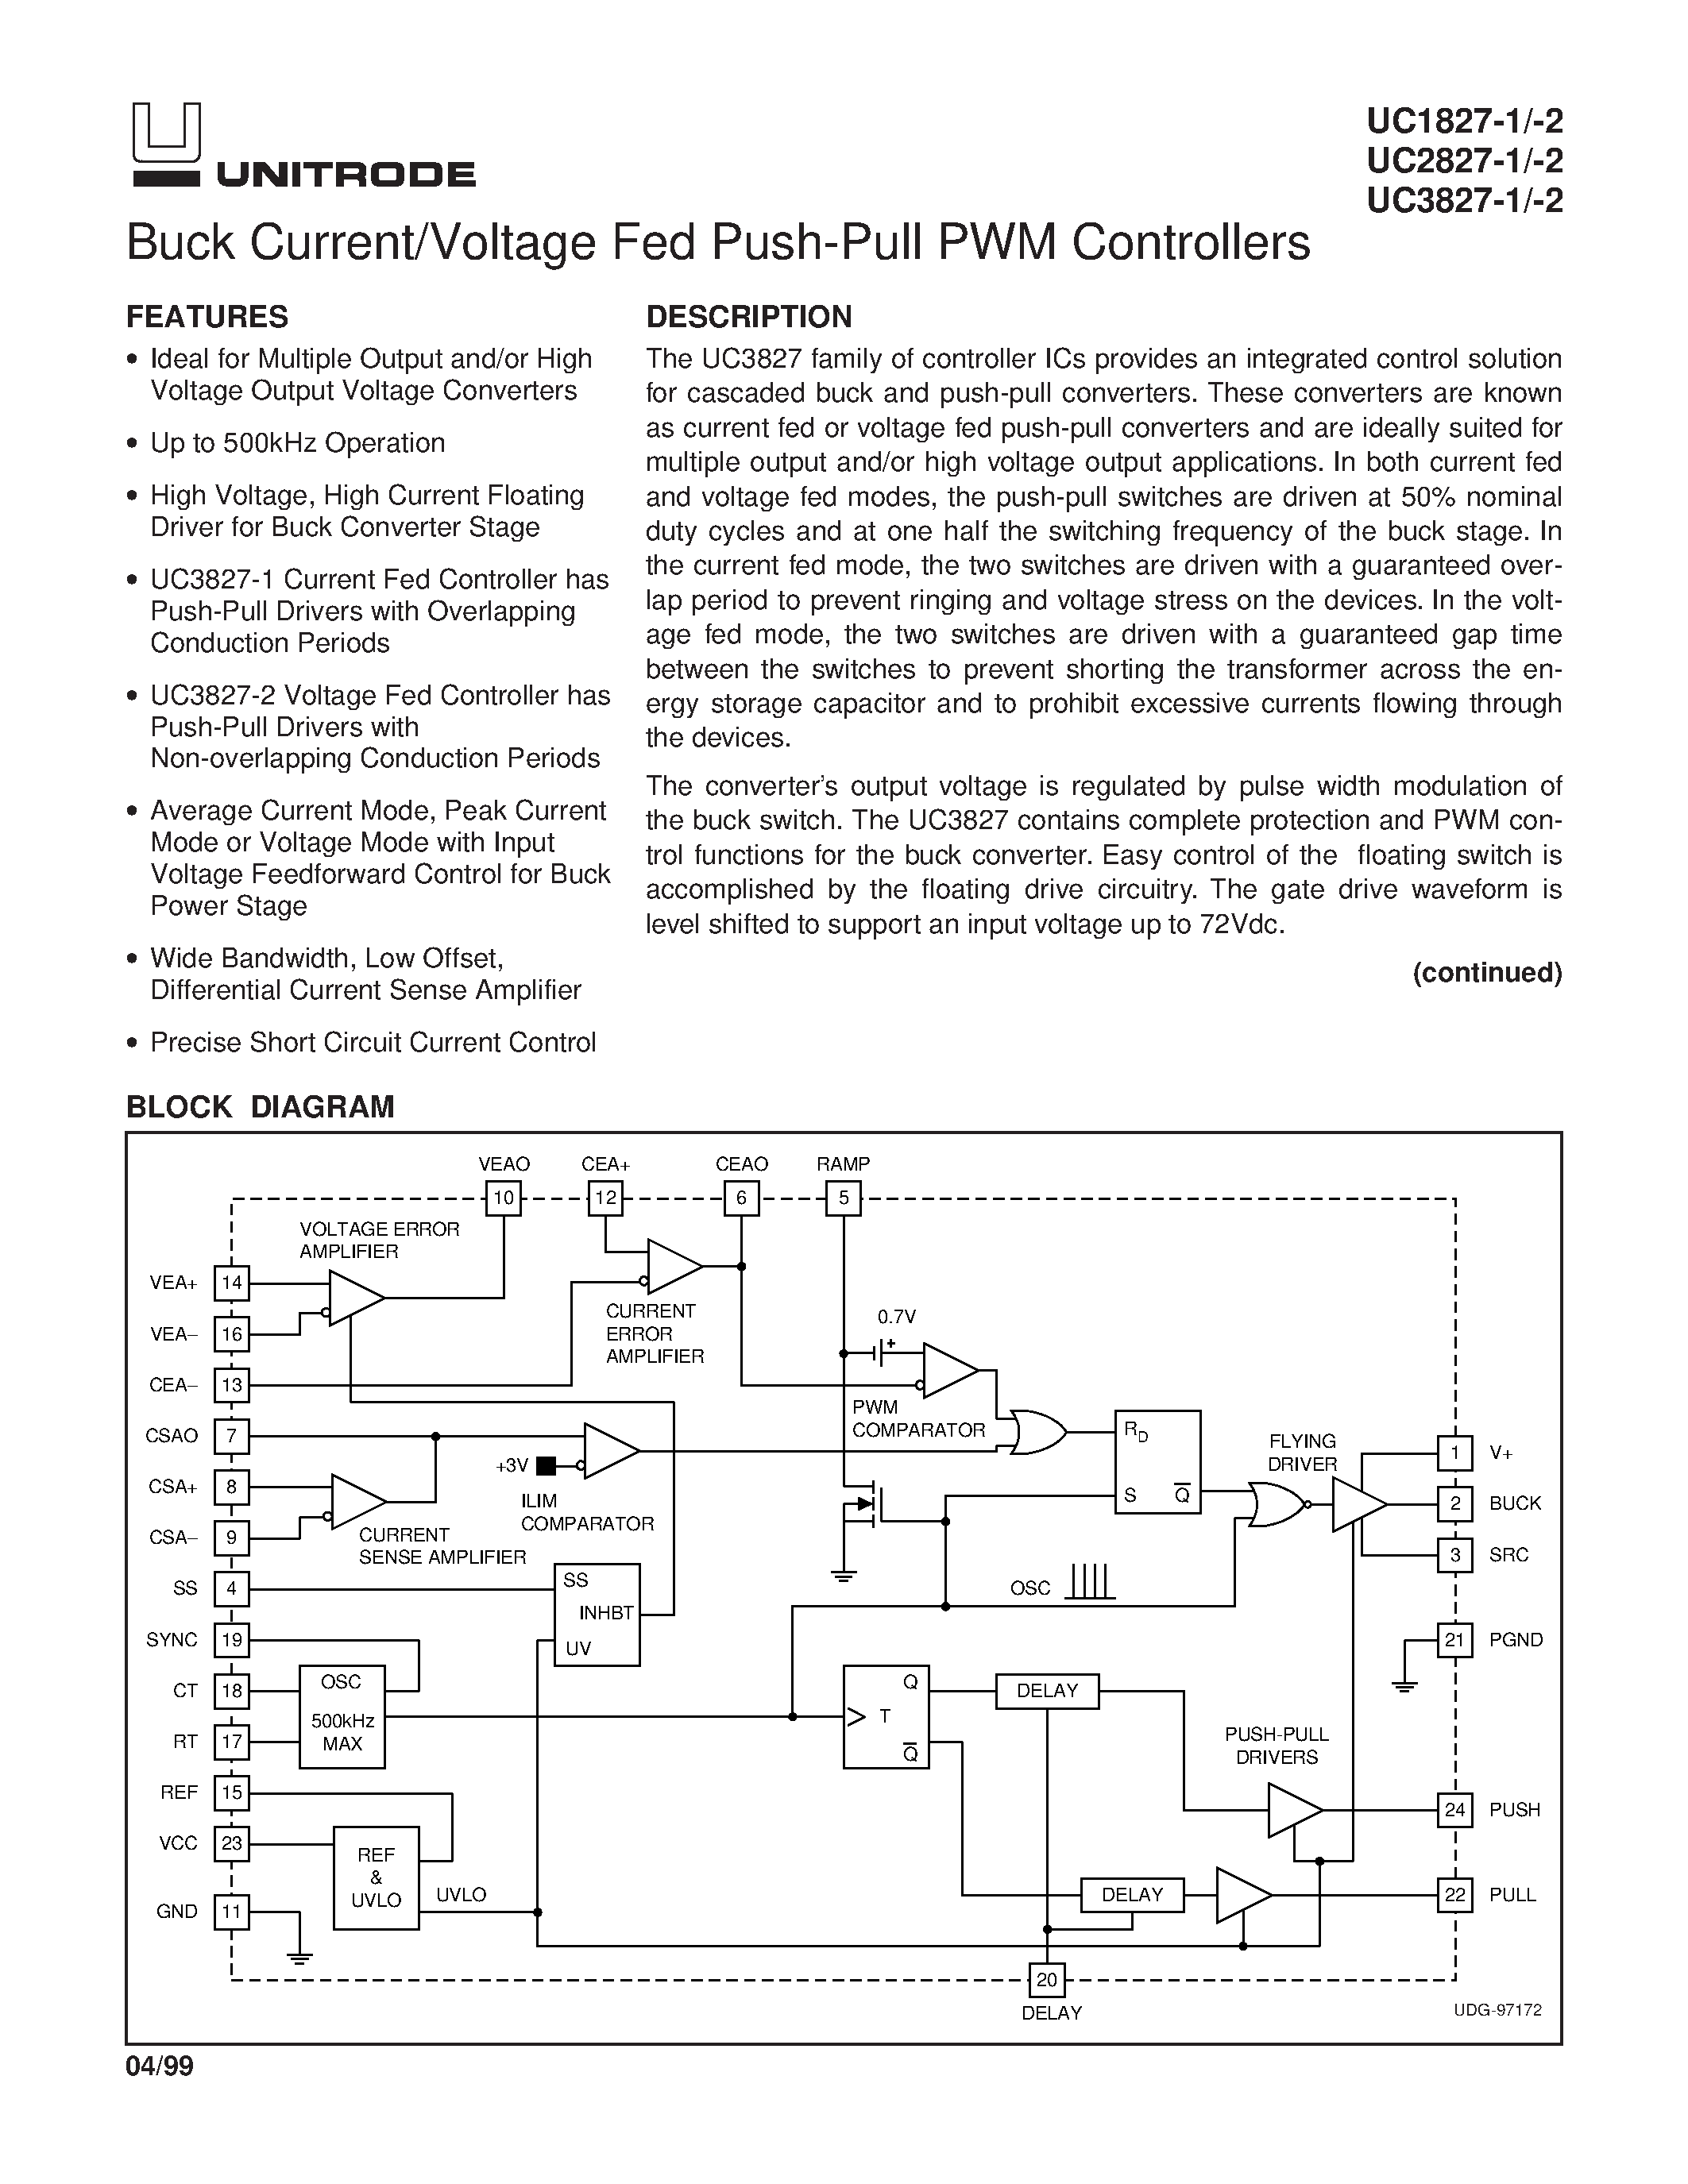 Datasheet UC2827 - Buck Current/Voltage Fed Push-Pull PWM Controllers page 1